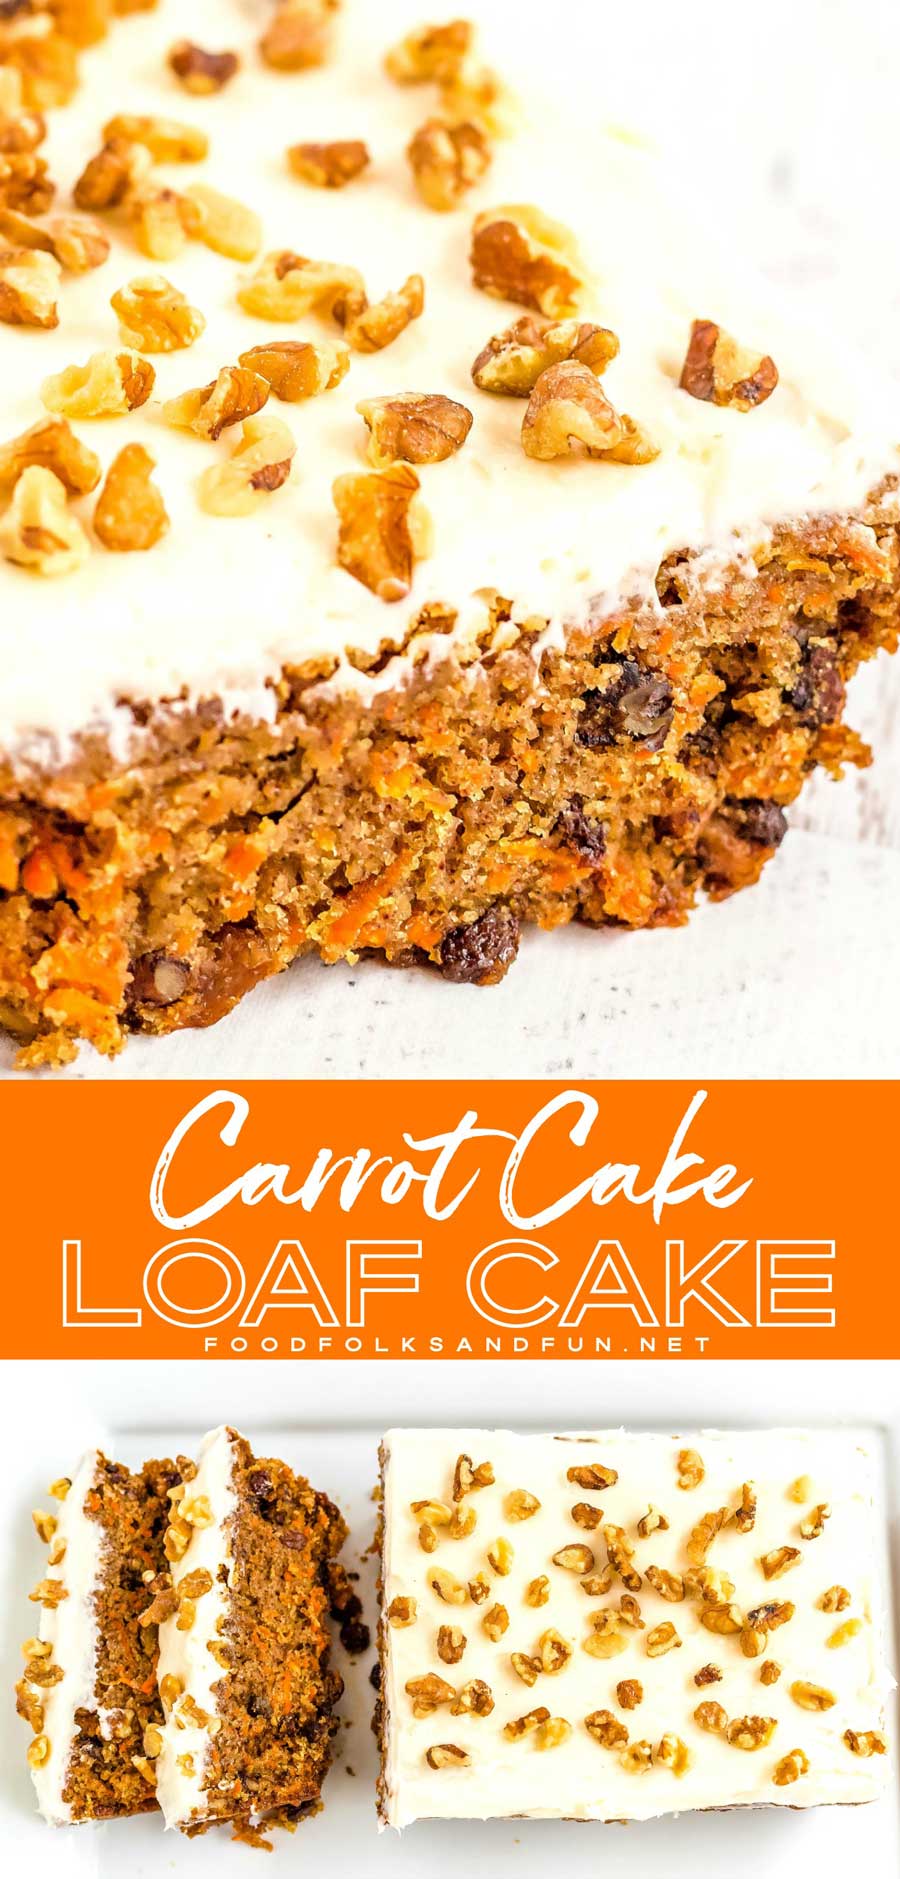 You'll love how easy and delicious this Carrot Cake Loaf recipe is. It's topped with my favorite recipe for fluffy cream cheese frosting! #easyrecipe #easydessert #carrotcake #cake #creamcheese #SpringRecipe #EasterRecipe #EasterDessert #SpringDessert #foodfolksandfun via @foodfolksandfun